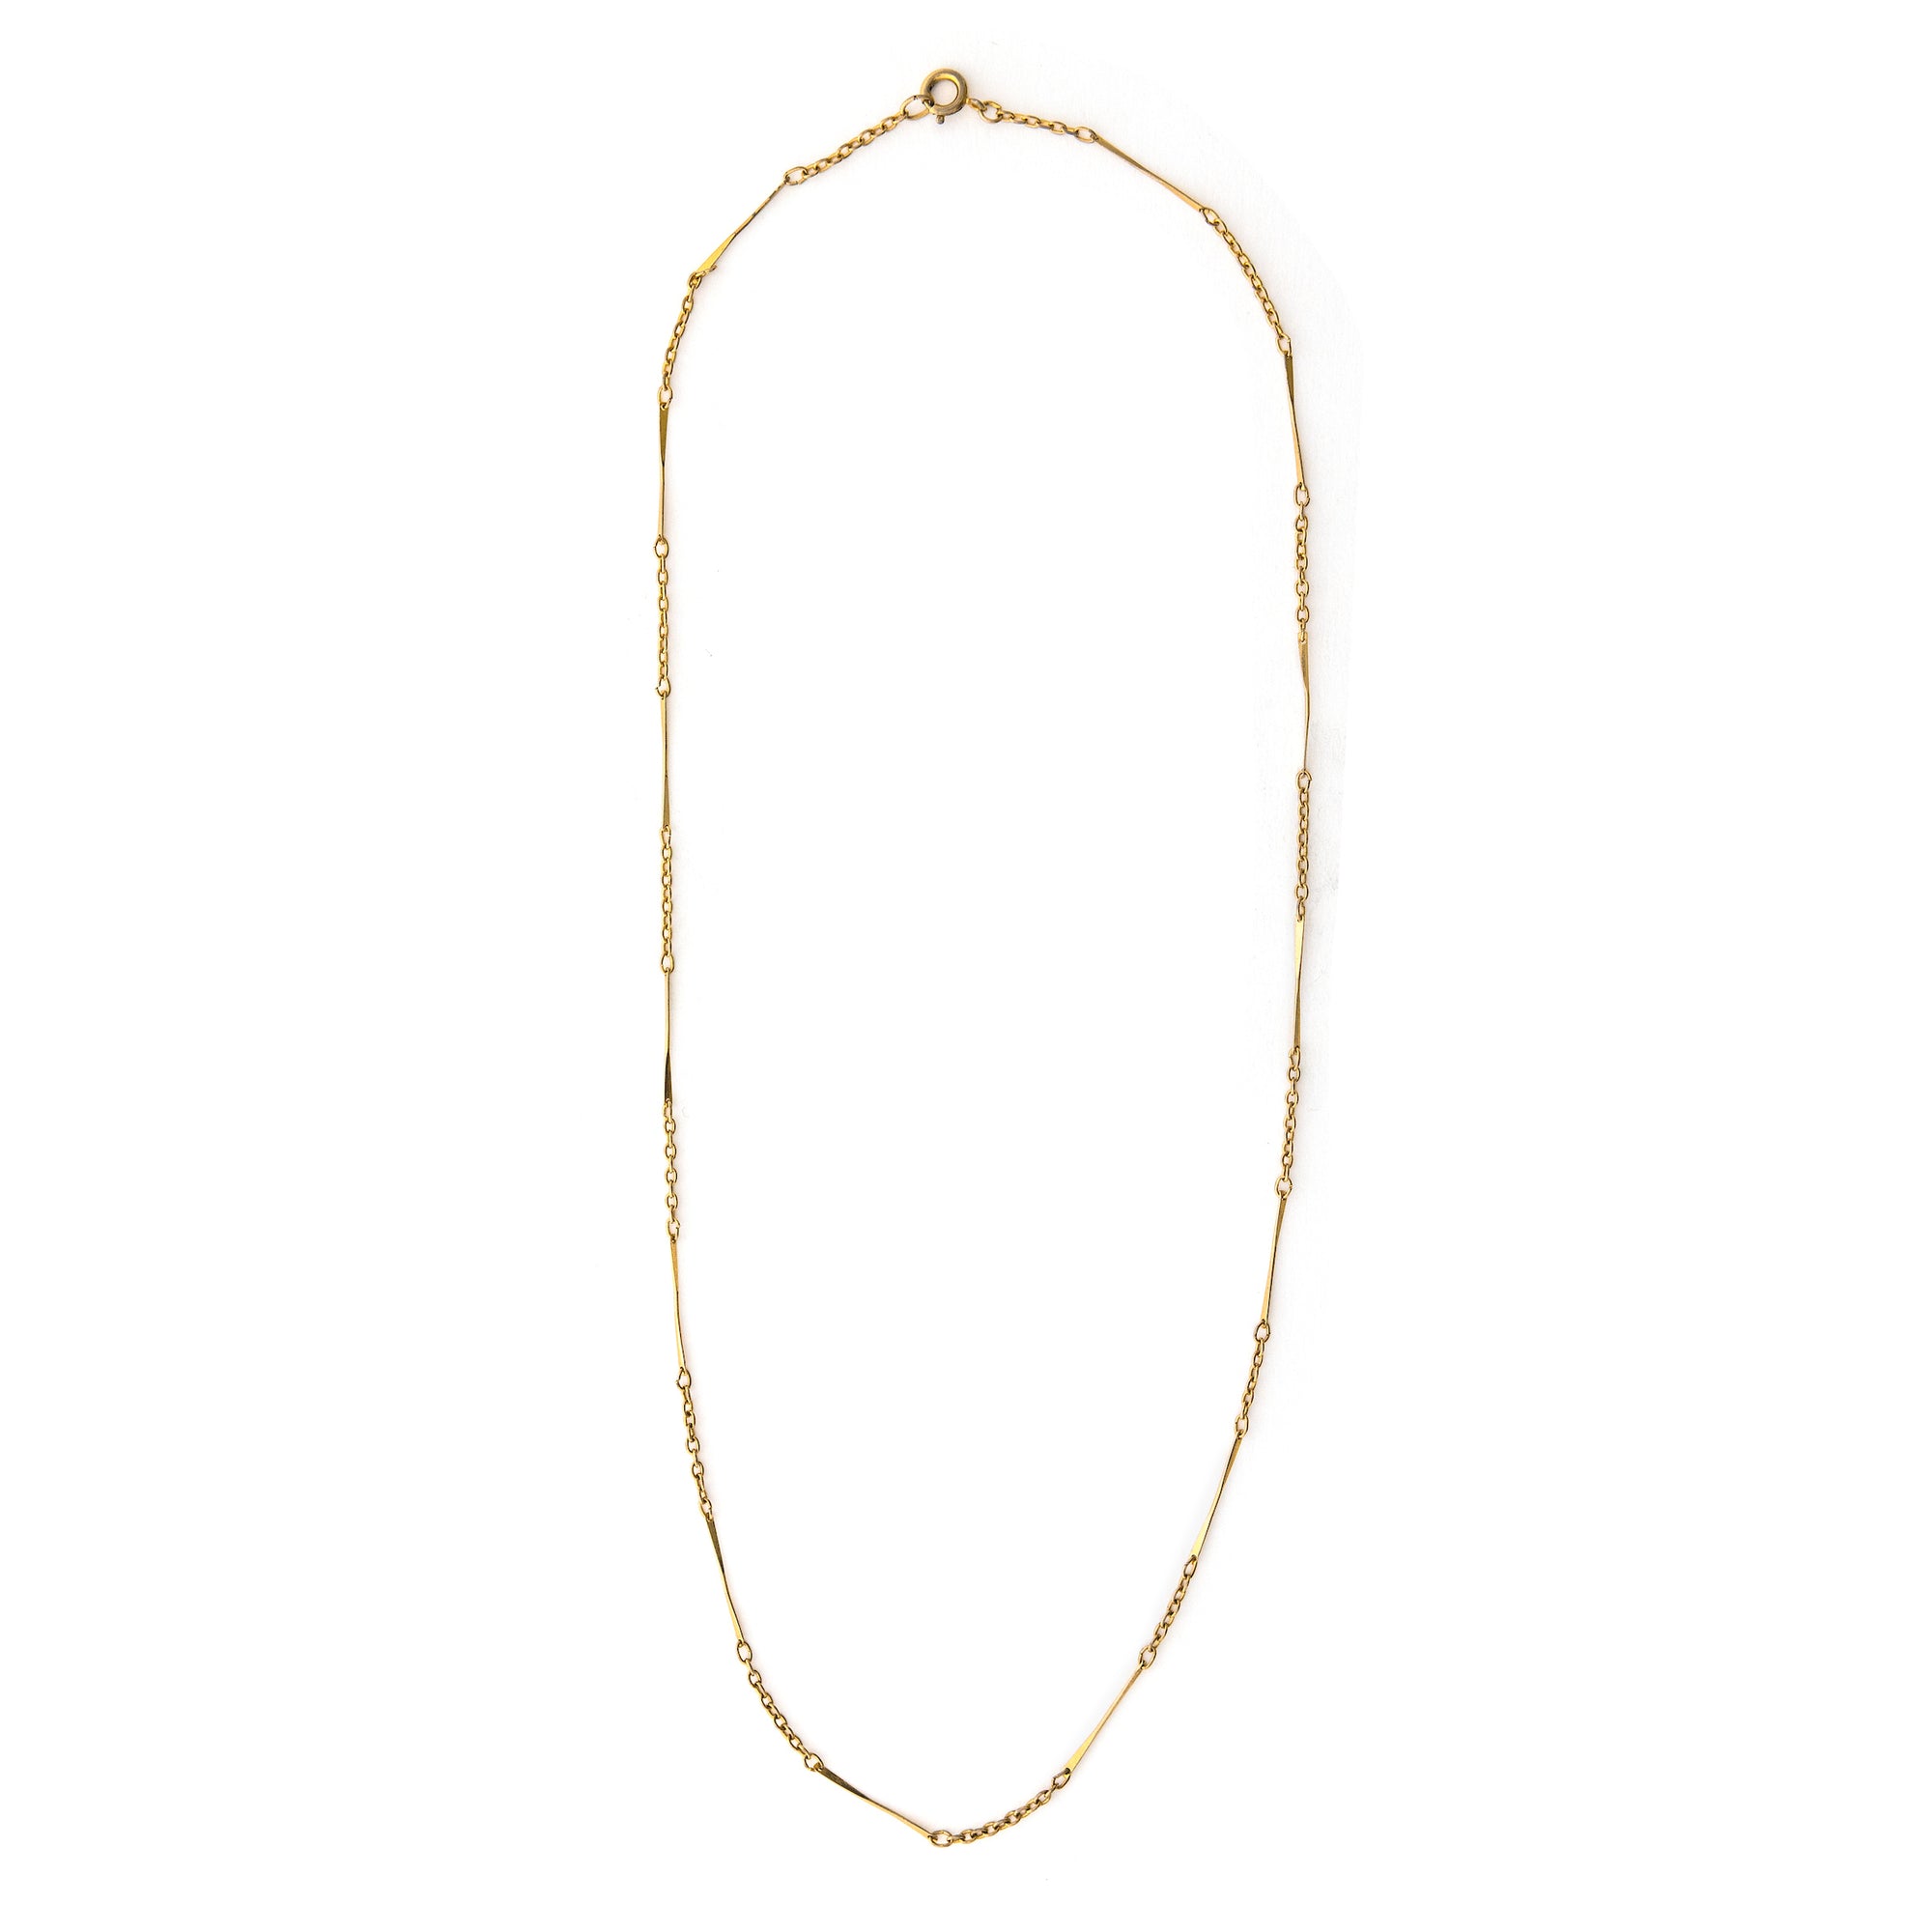 This gold fill vintage bar link chain features beautifully delicate bars and cable links in a pleasing pattern. Each bar has a slight twist which makes it even more eye catching. Wear this piece alone, with charms or a locket, or layered with other chains for a bold statement. Close up view